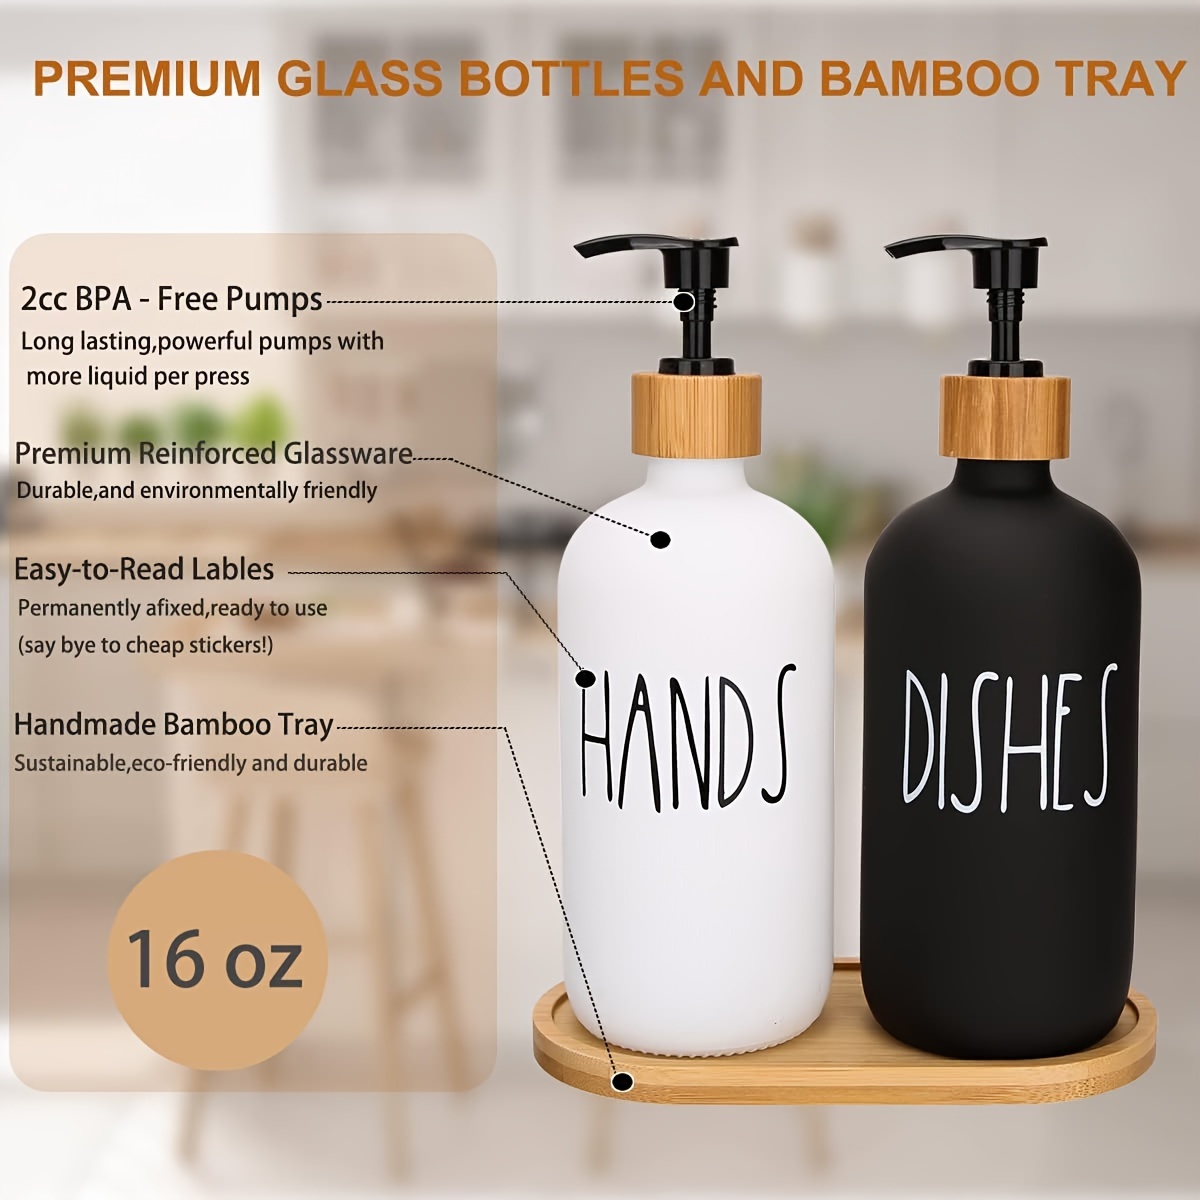 Black Glass Kitchen Soap Dispenser Set With Tray Luxury Hand and